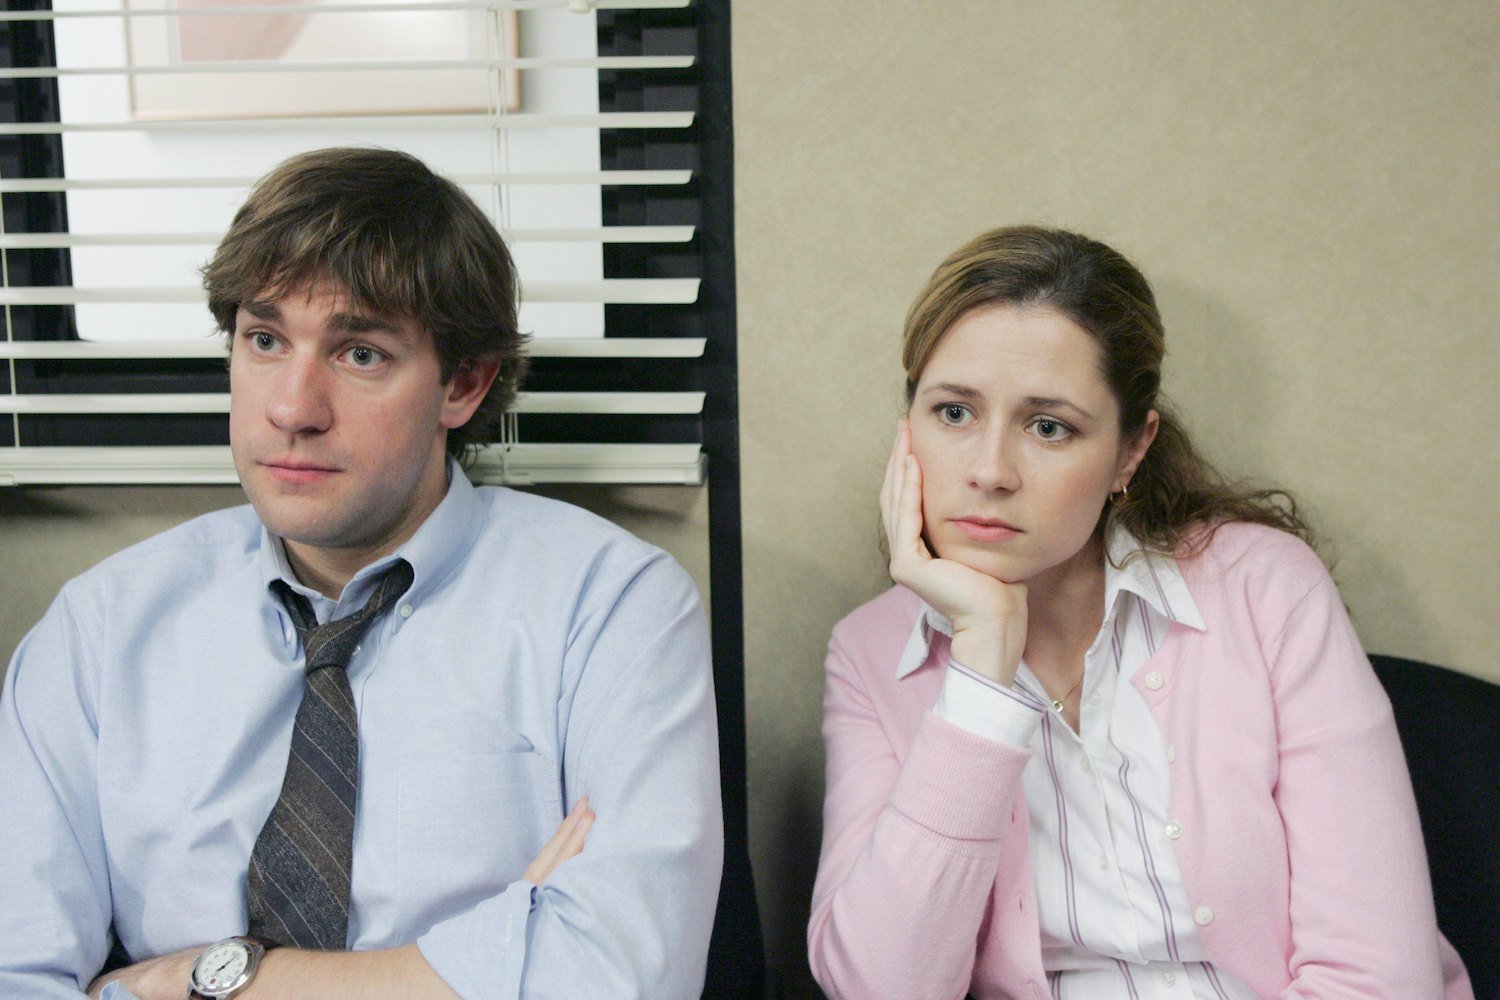 The Office stars John Krasinski as Jim Halpert and Jenna Fischer as Pam Beesly sit next to each other in the conference room